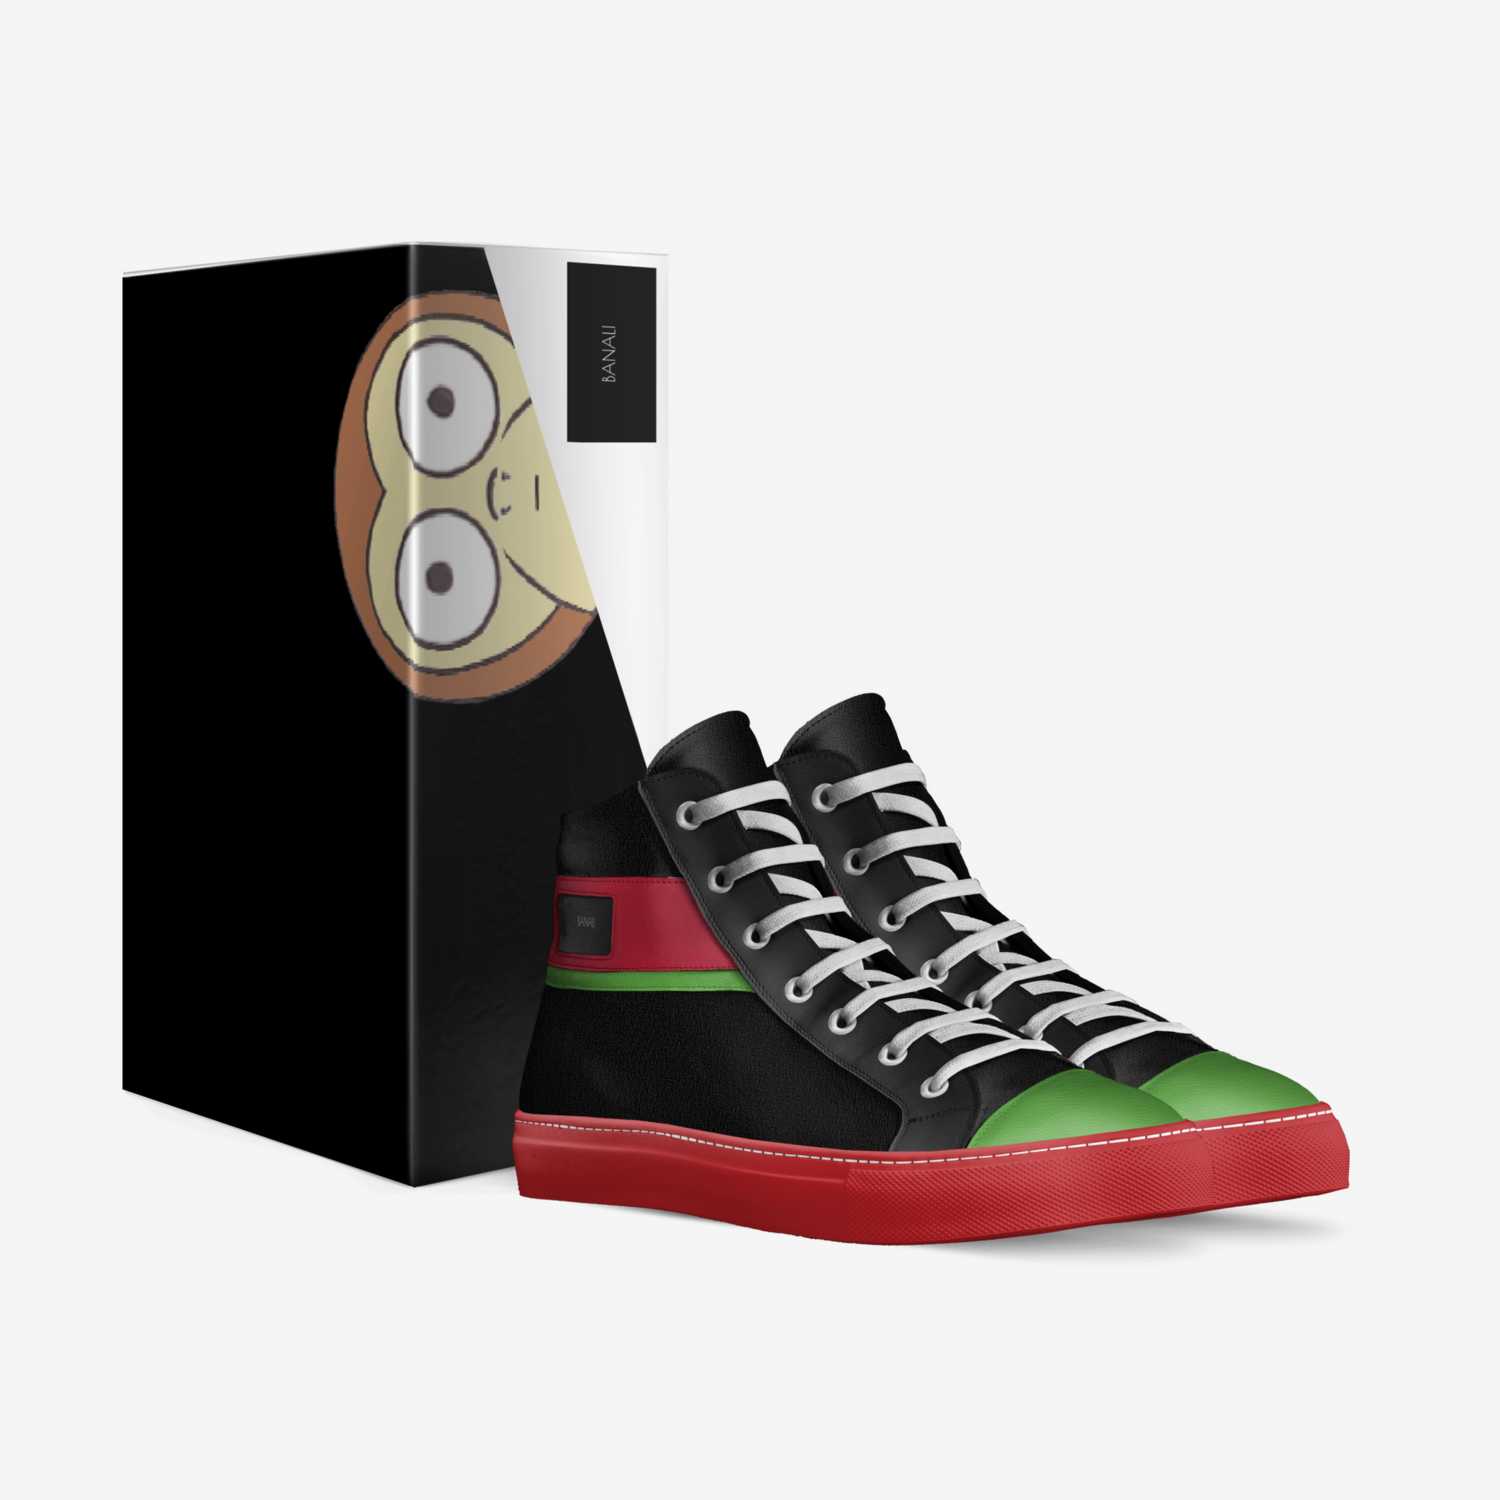 Banali custom made in Italy shoes by Hakeem Dennis | Box view